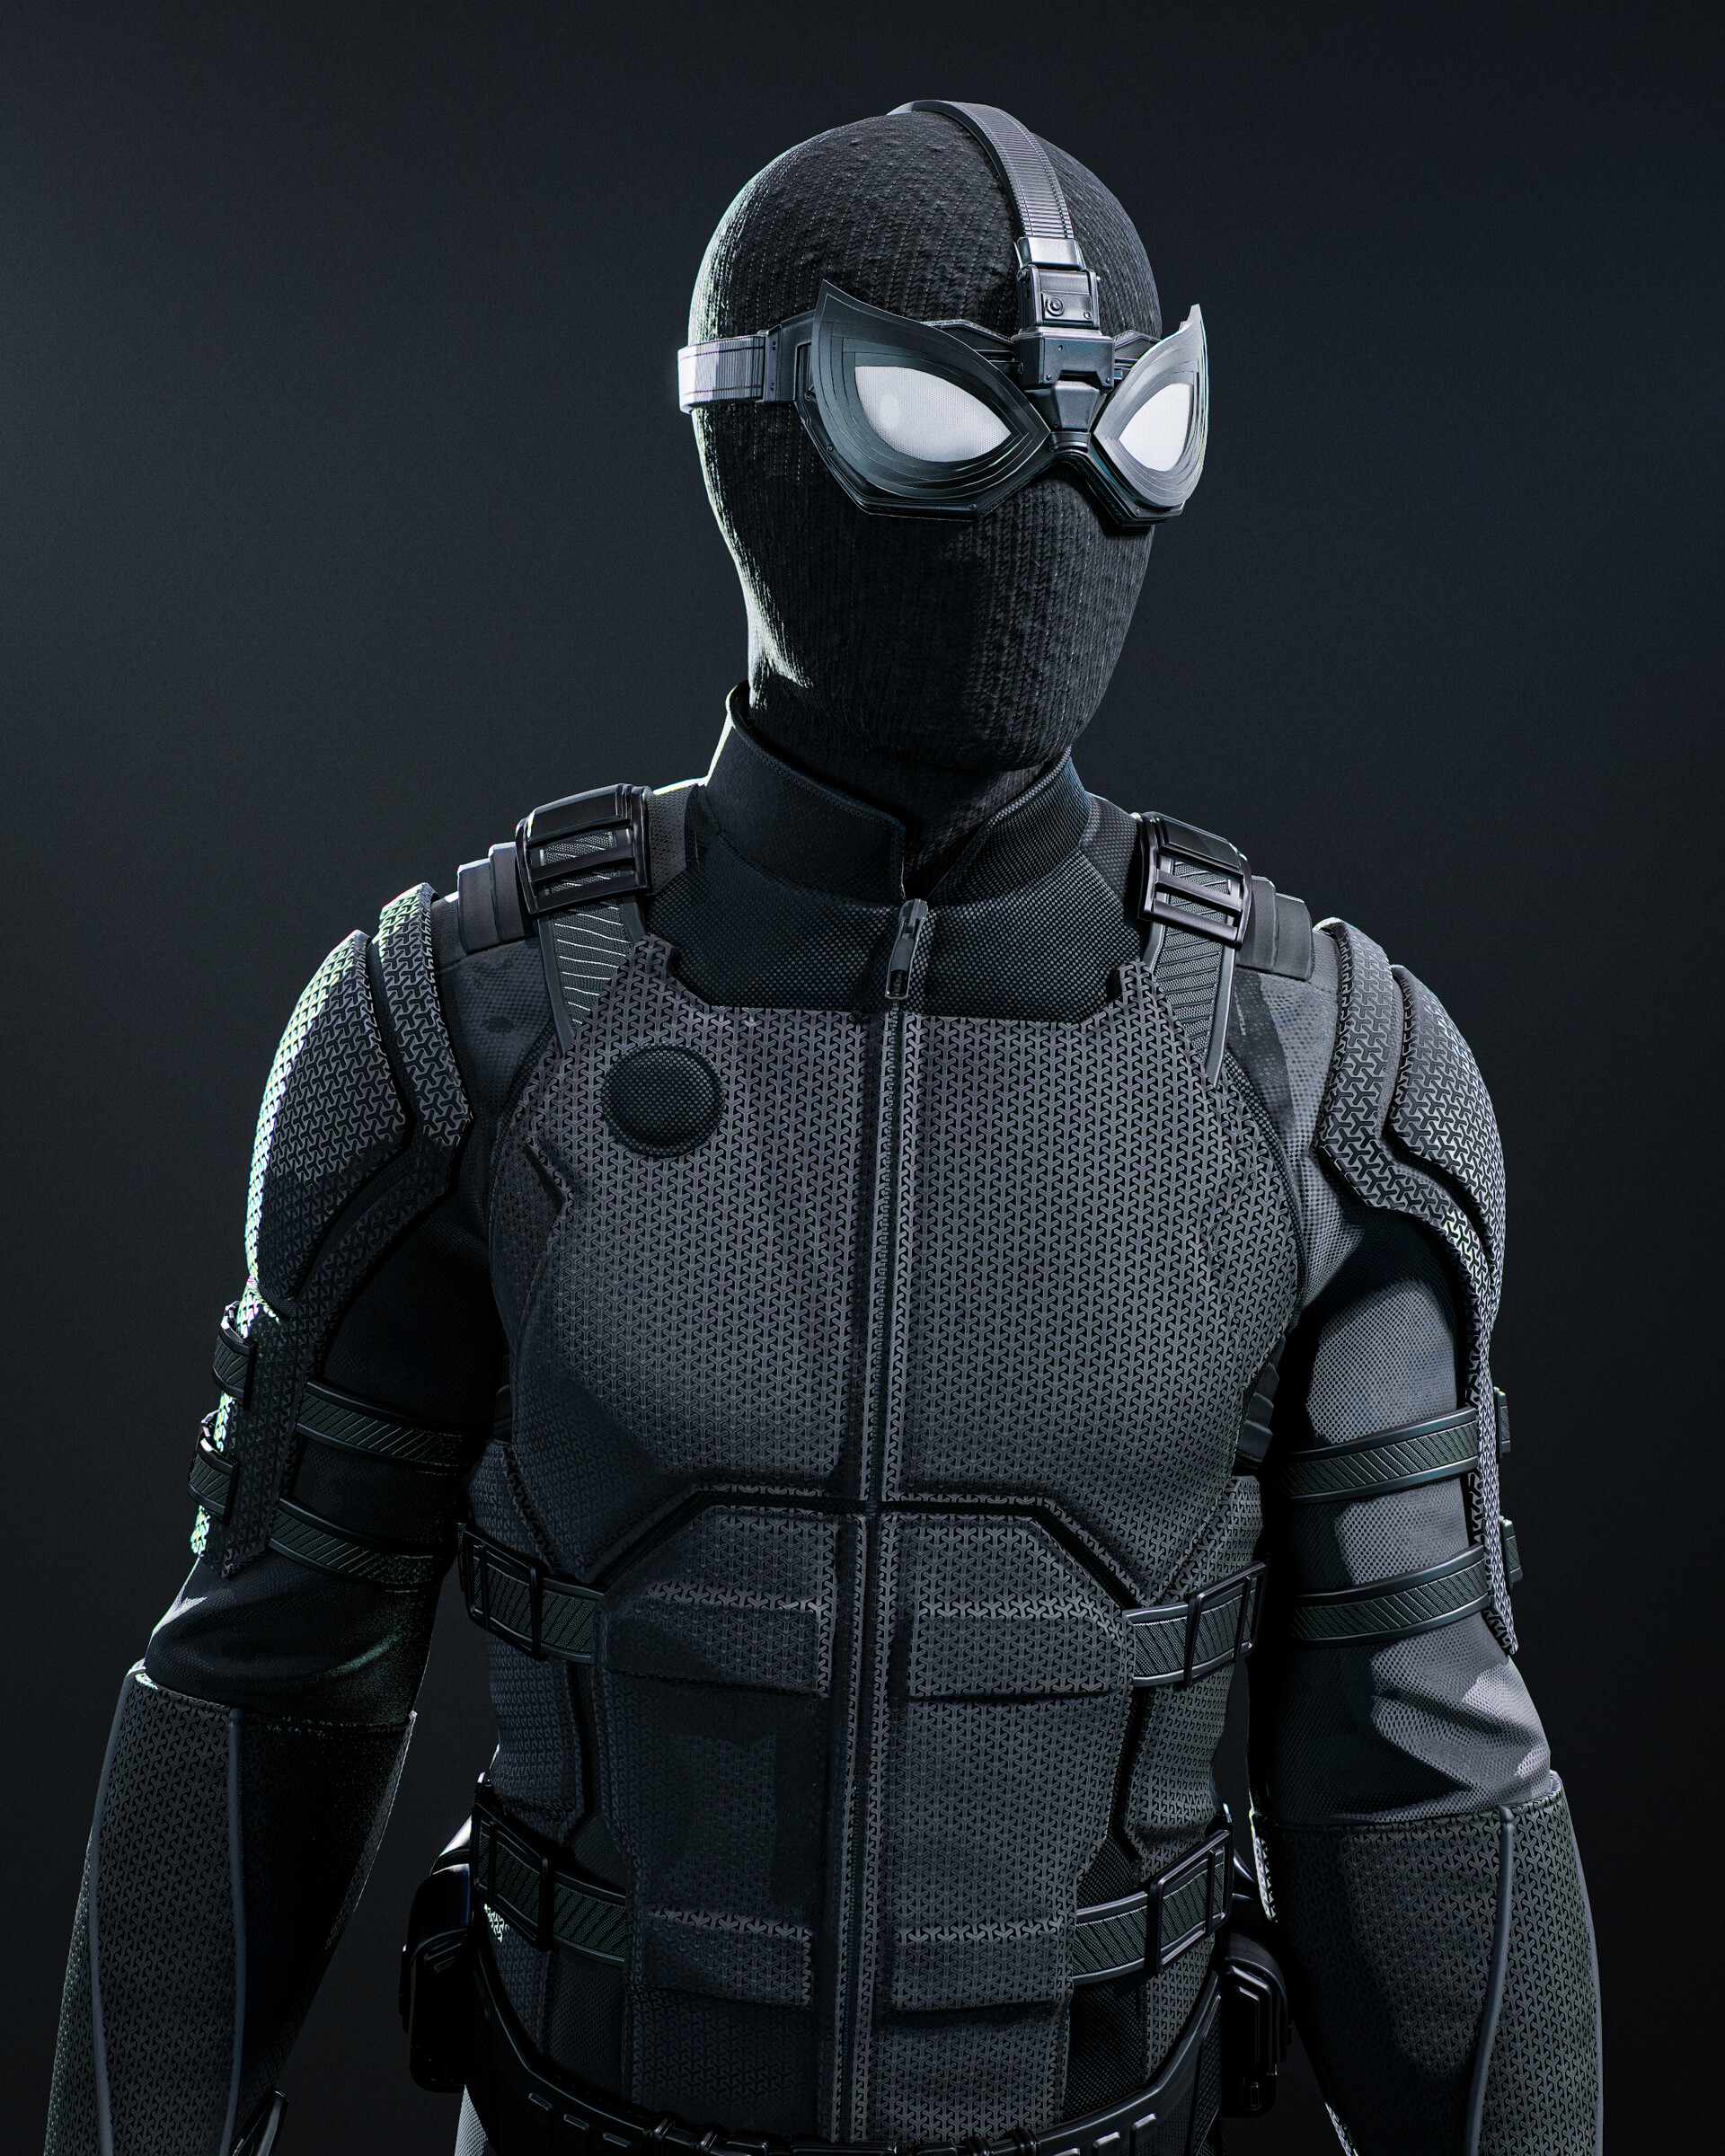 Spider-Man: Far From Home stealth suit by Nomada-Warrior on DeviantArt